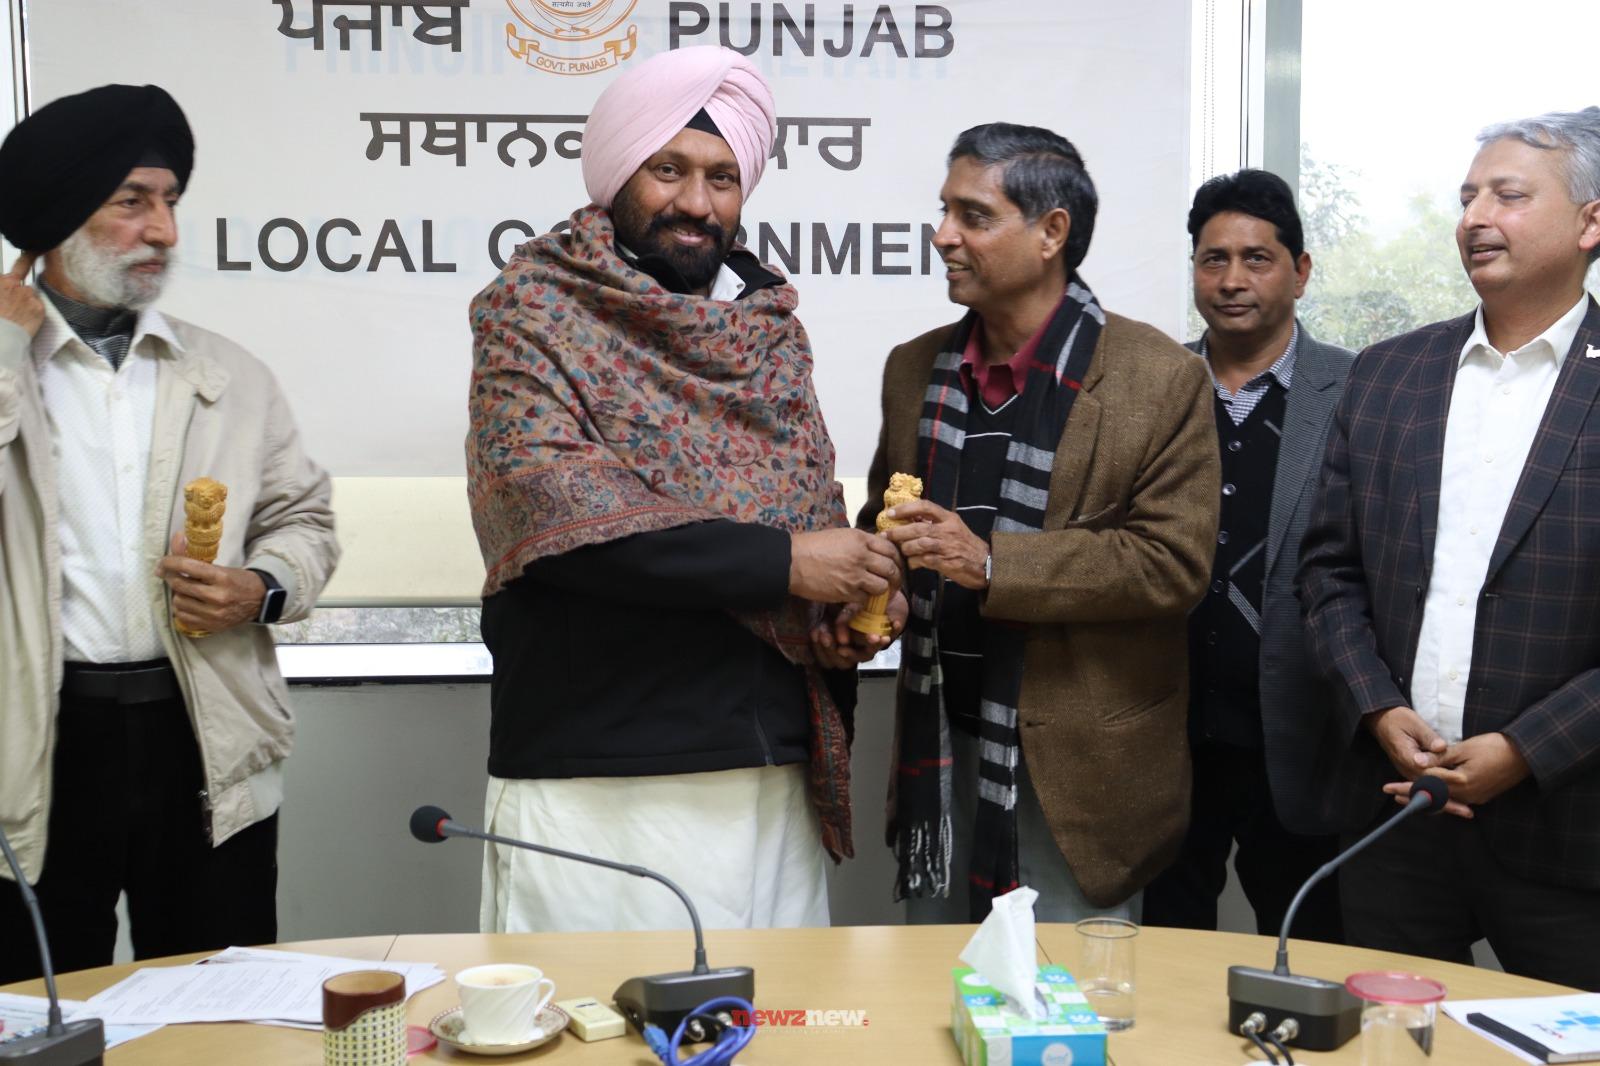 Local Government Minister Balkar Singh Honors Winners of City Beauty Competition